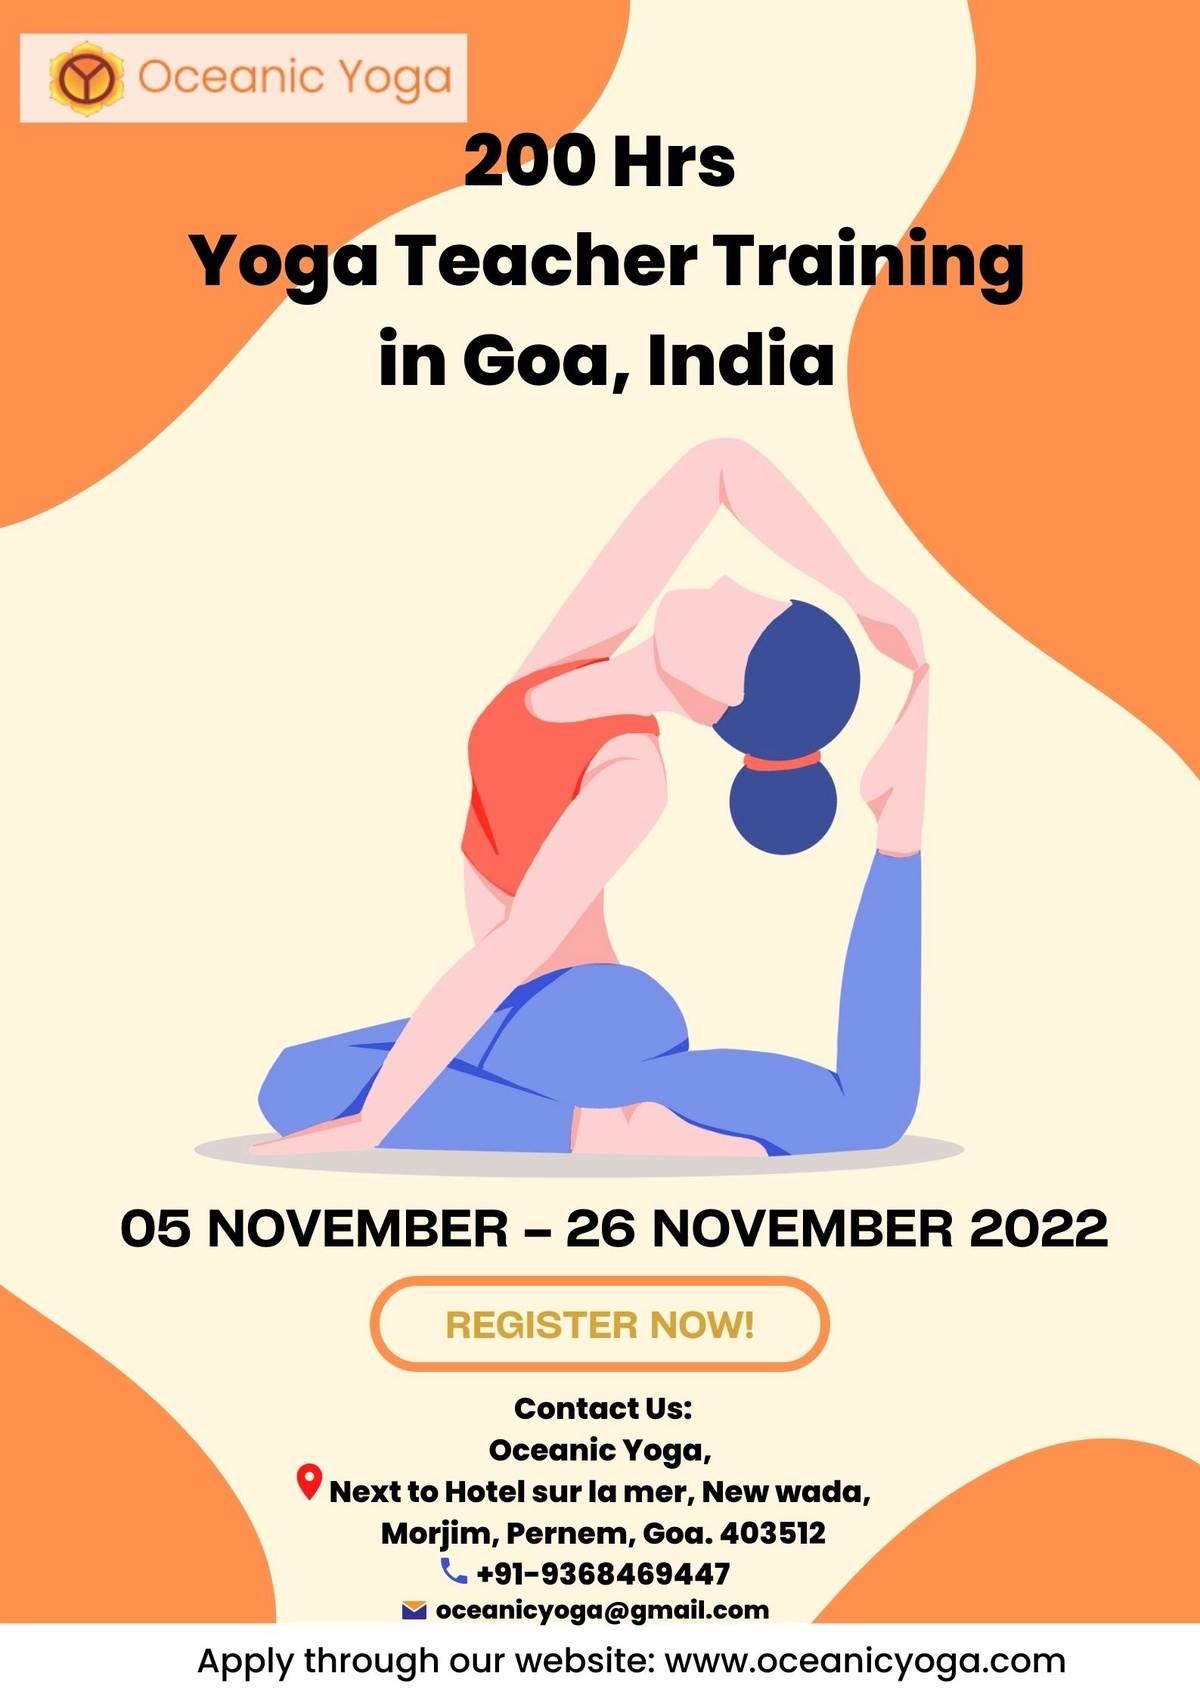 Select a 200-hour yoga teacher training course in India